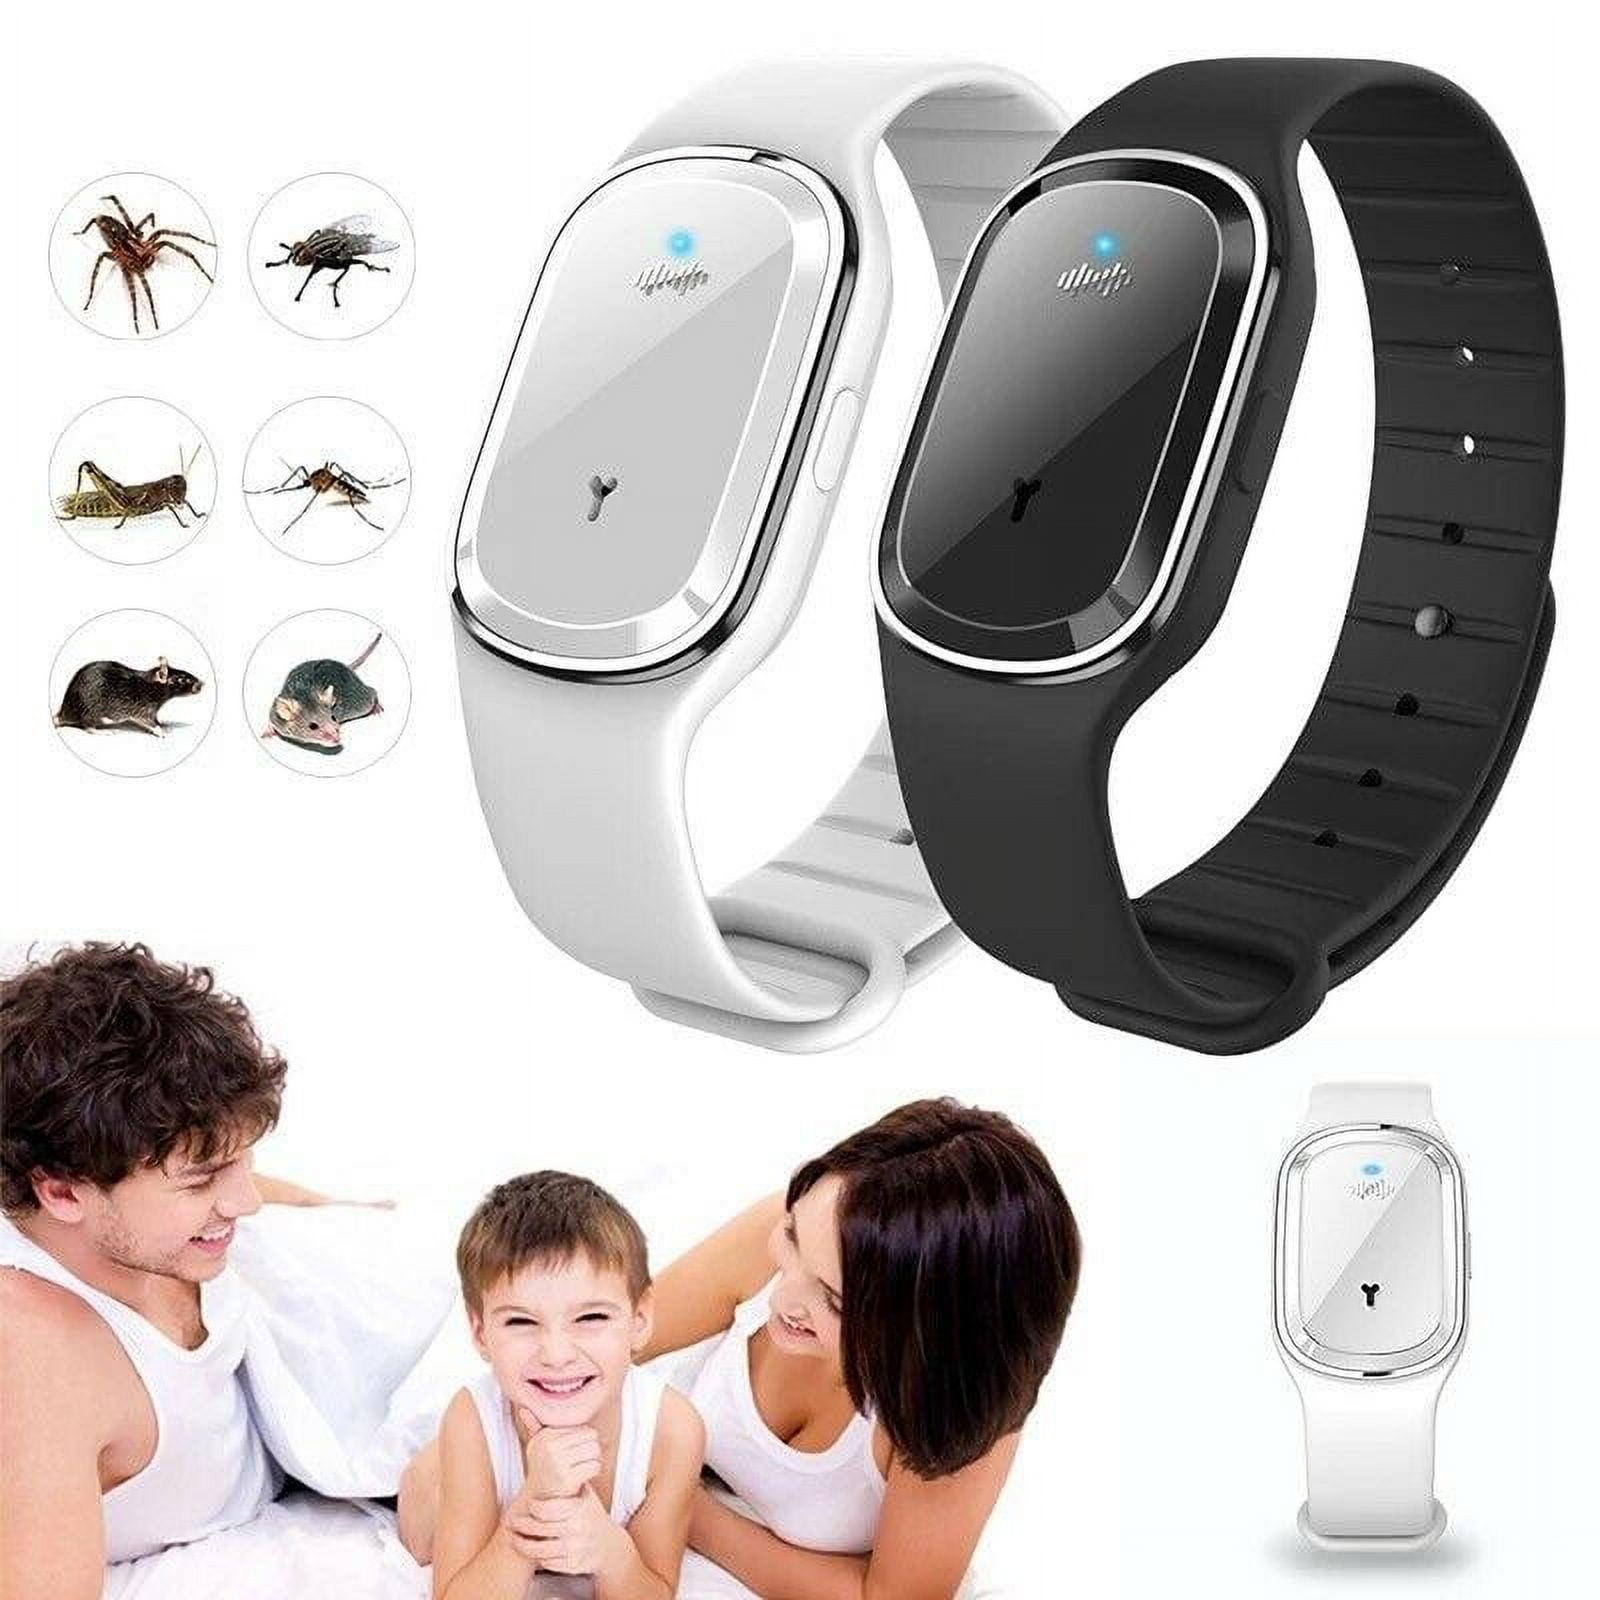 Ultrasonic Anti-Mosquito Repellent Bracelet Bug Insect Pest Repeller Wrist  Watch | eBay